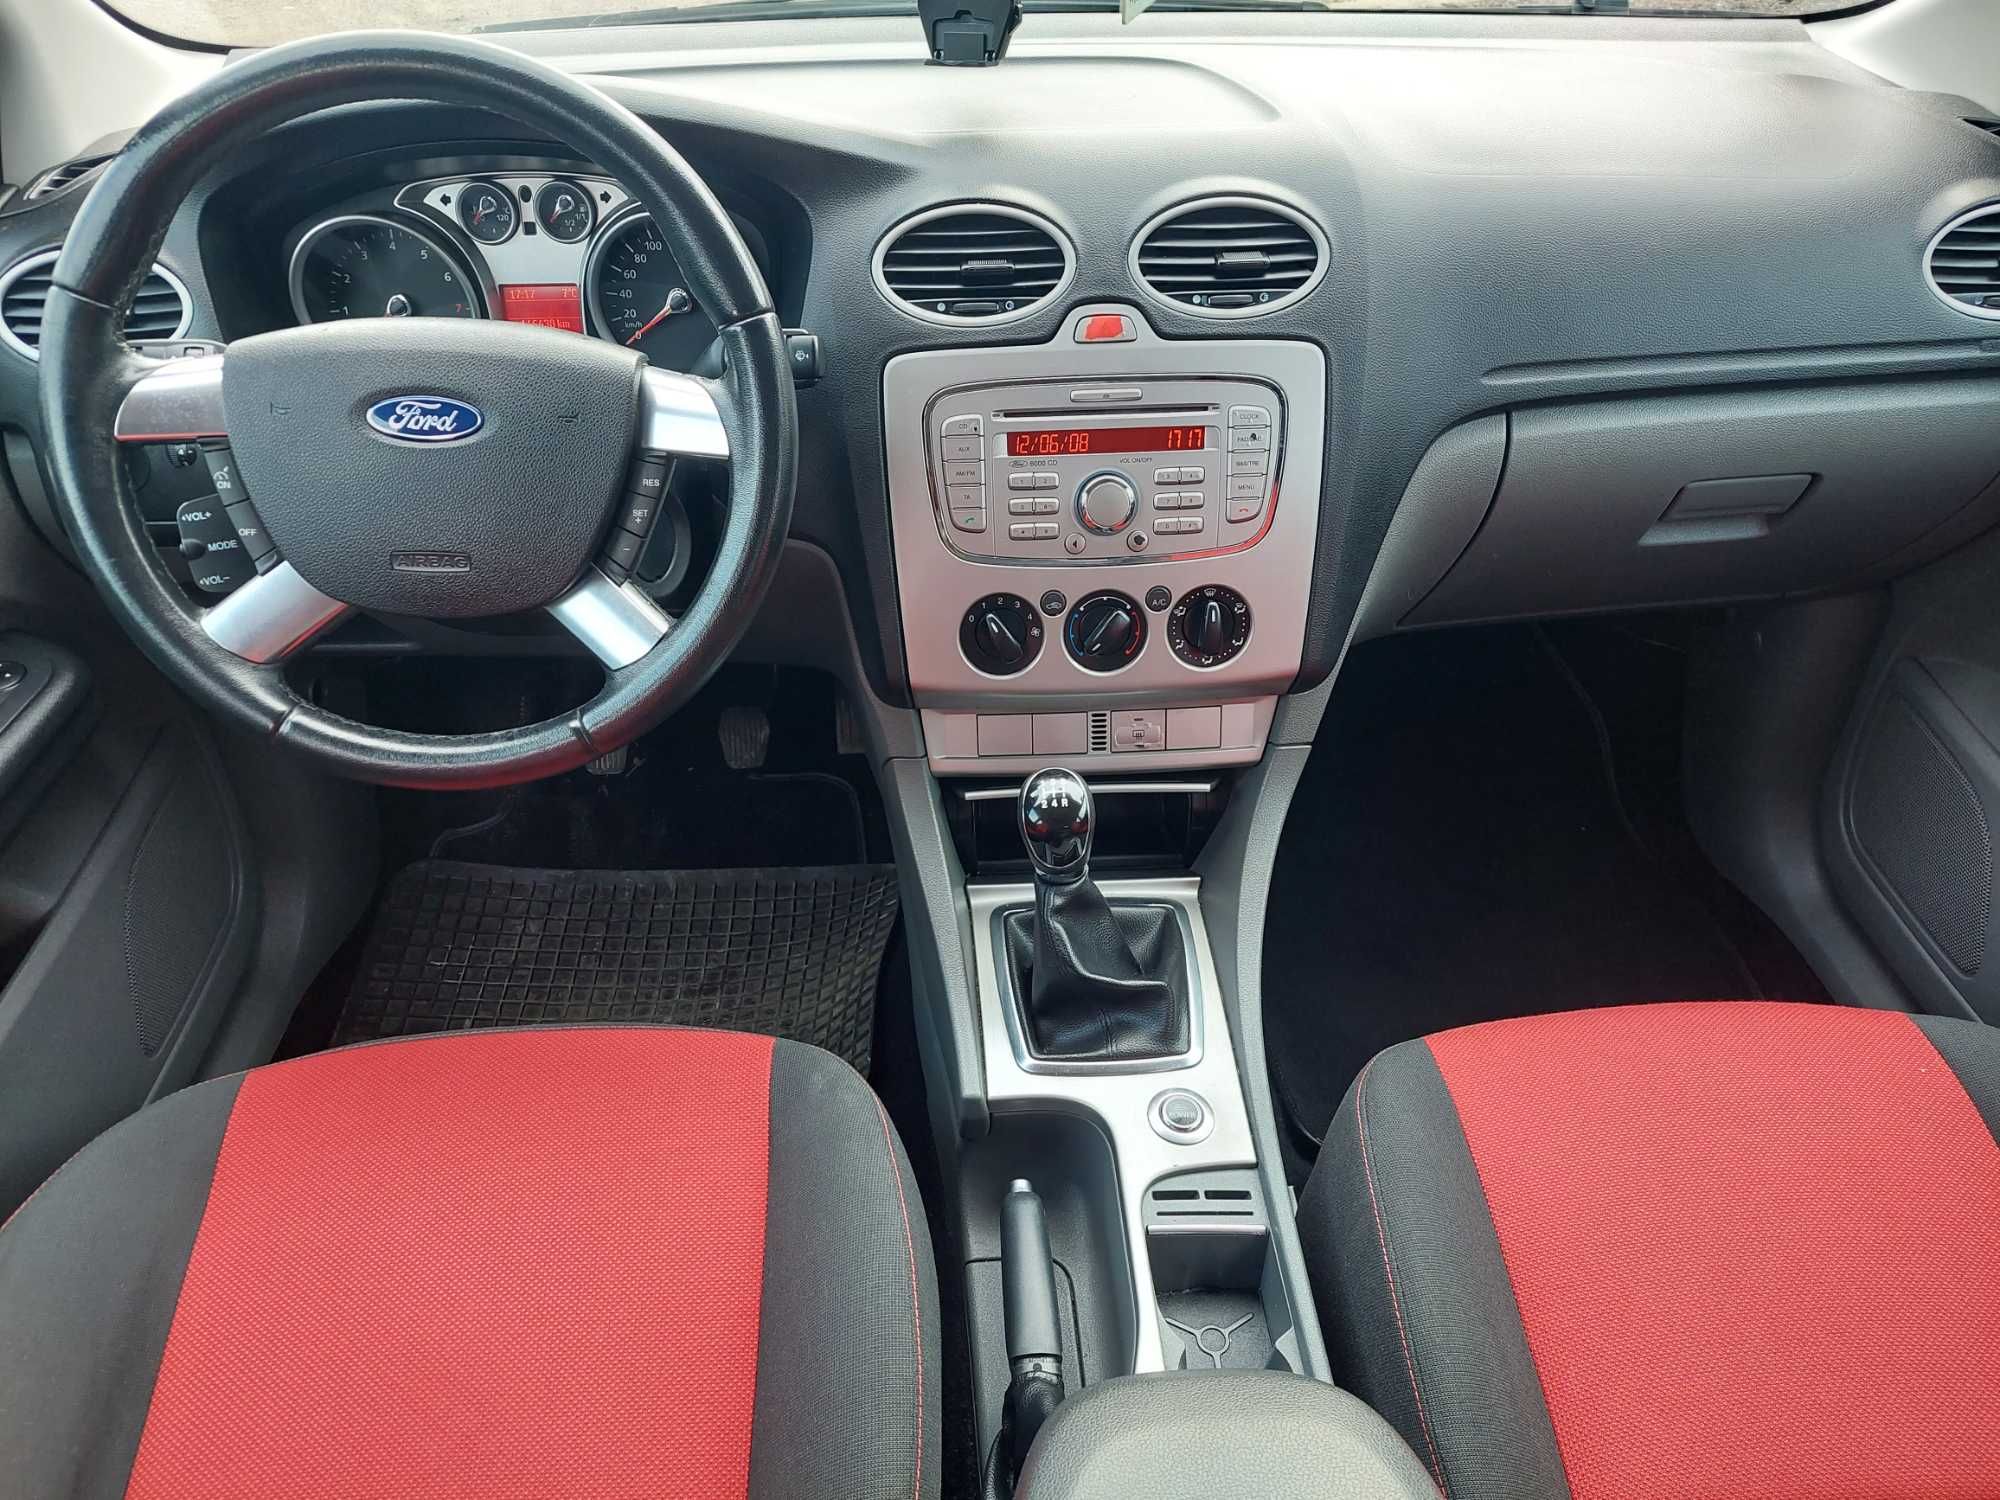 Ford Focus 2008 rok 1.6 Benzyna!!!